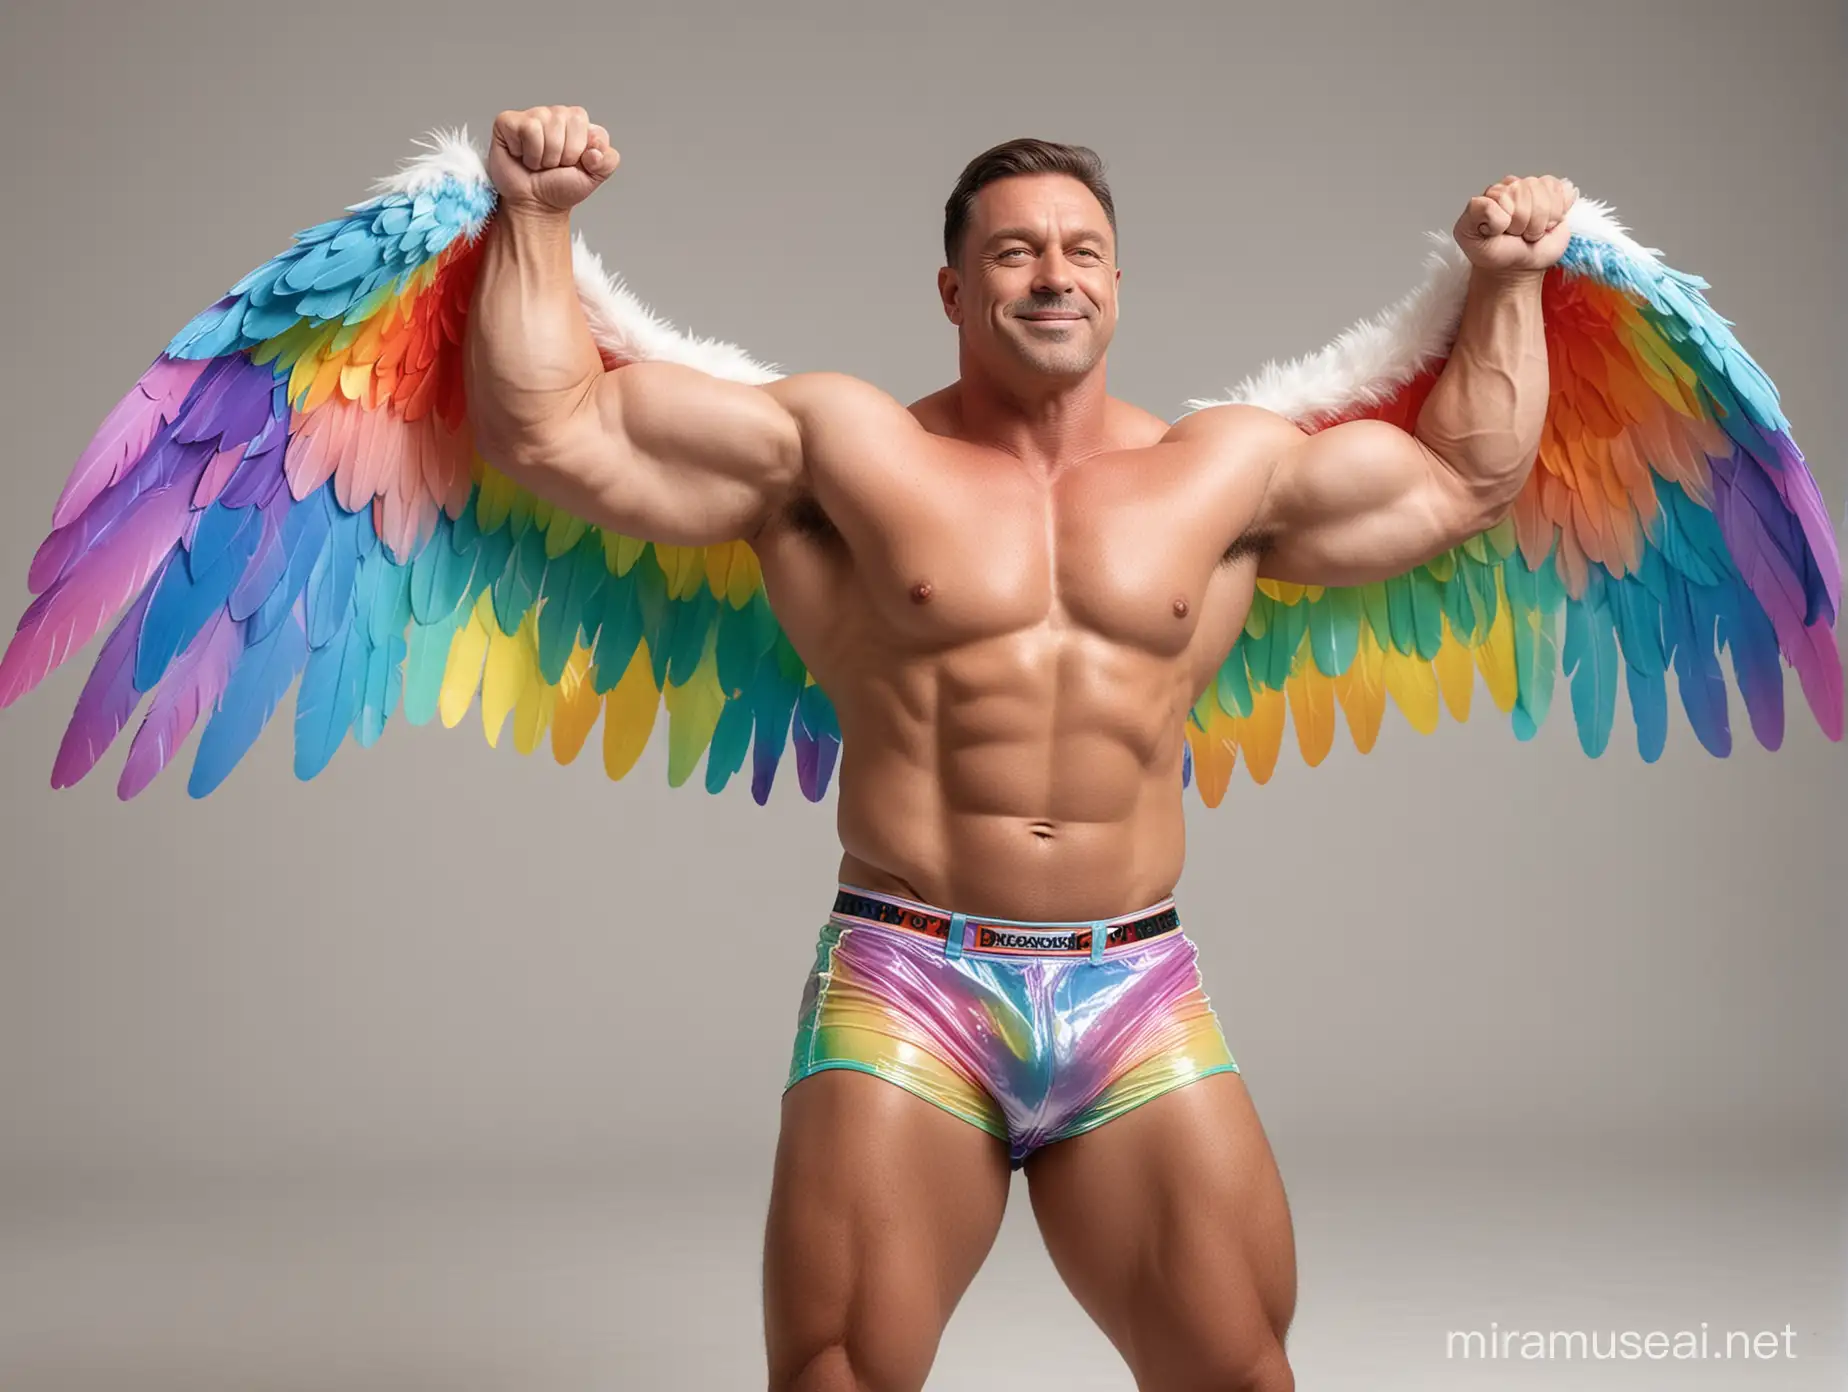 Studio Light Topless 40s Ultra Chunky Caucasian Bodybuilder Daddy Wearing Multi-Highlighter Bright Rainbow Colored See Through huge Eagle Wings Shoulder Jacket short shorts and Flexing his Big Strong Arm Up with Doraemon